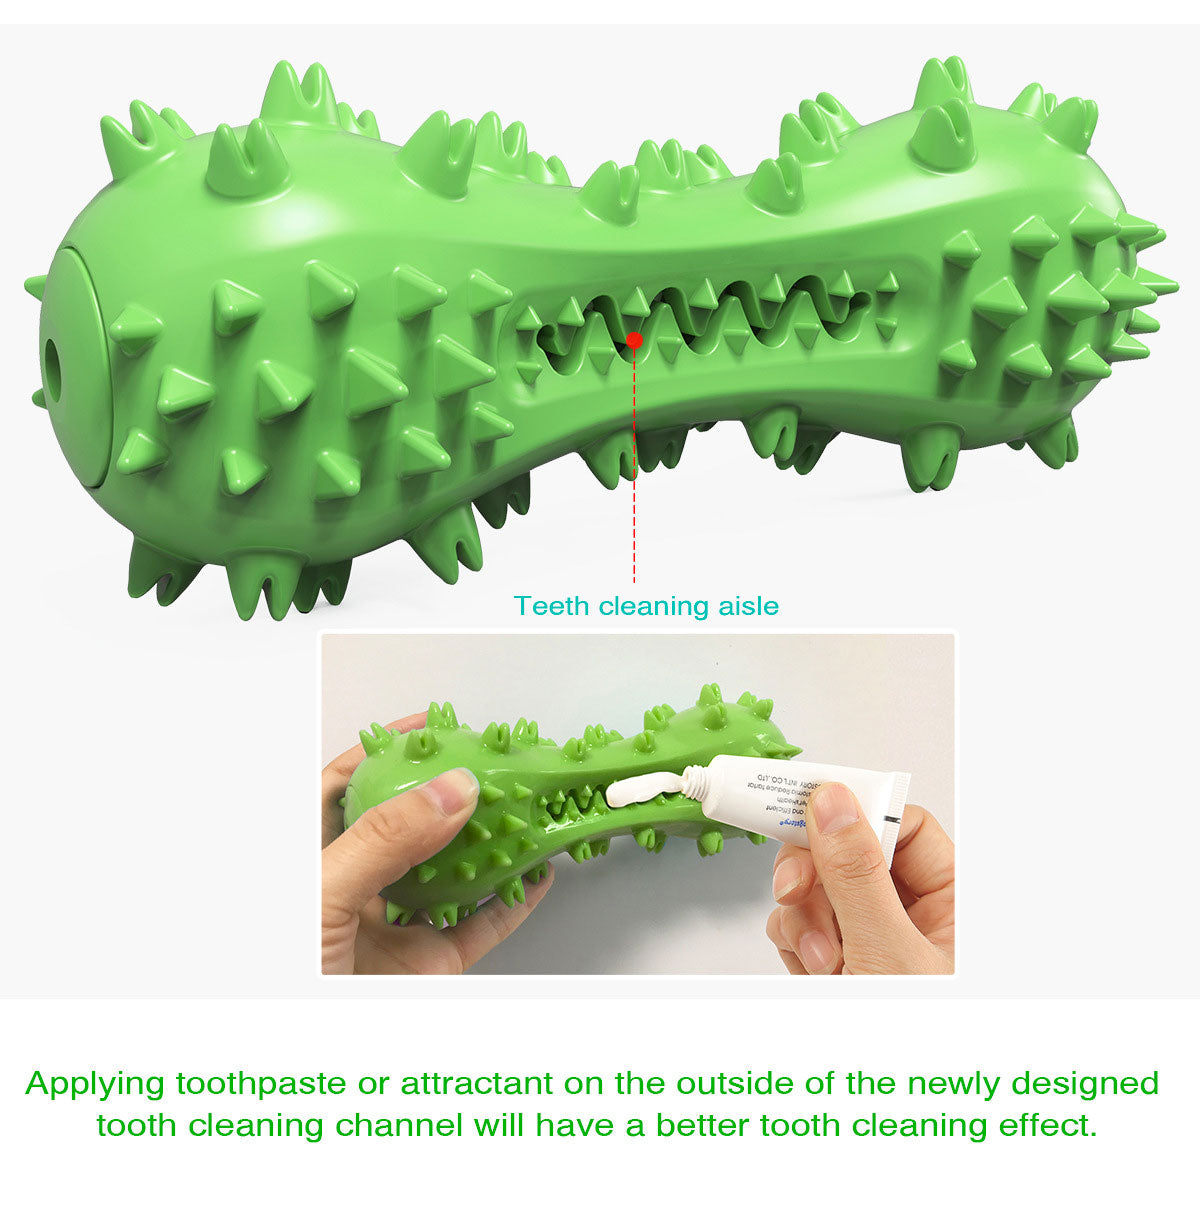 https://cdn.shopifycdn.net/s/files/1/0065/3629/8594/files/PETDURO_Dog_Toy_Toothbrush_Chew_Stick_Indestructible_Teeth_Cleaning_Squeaker_9.jpg?v=1596526961